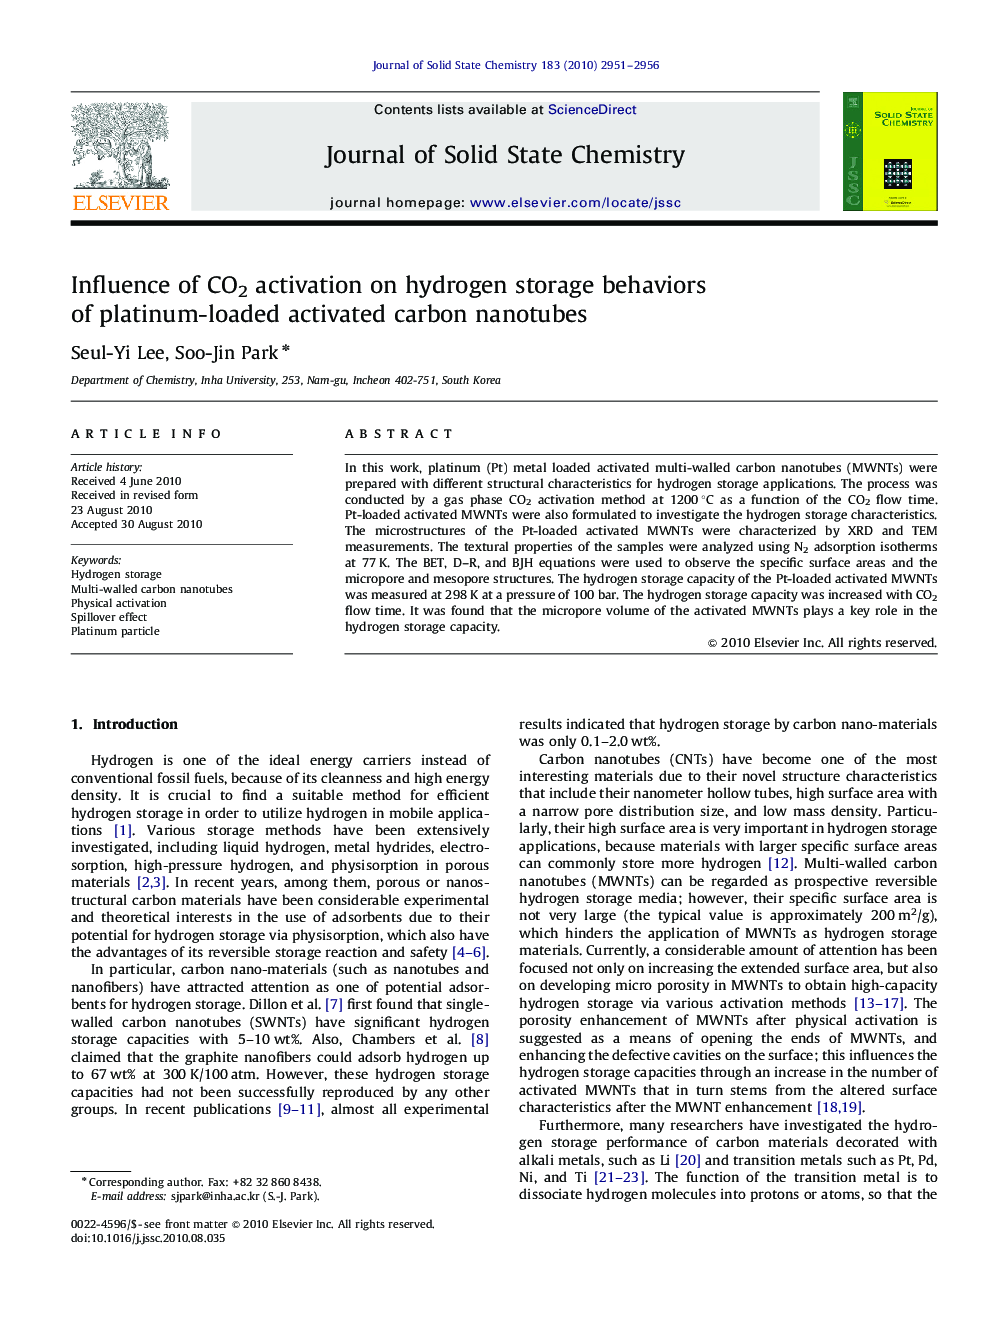 Influence of CO2 activation on hydrogen storage behaviors of platinum-loaded activated carbon nanotubes